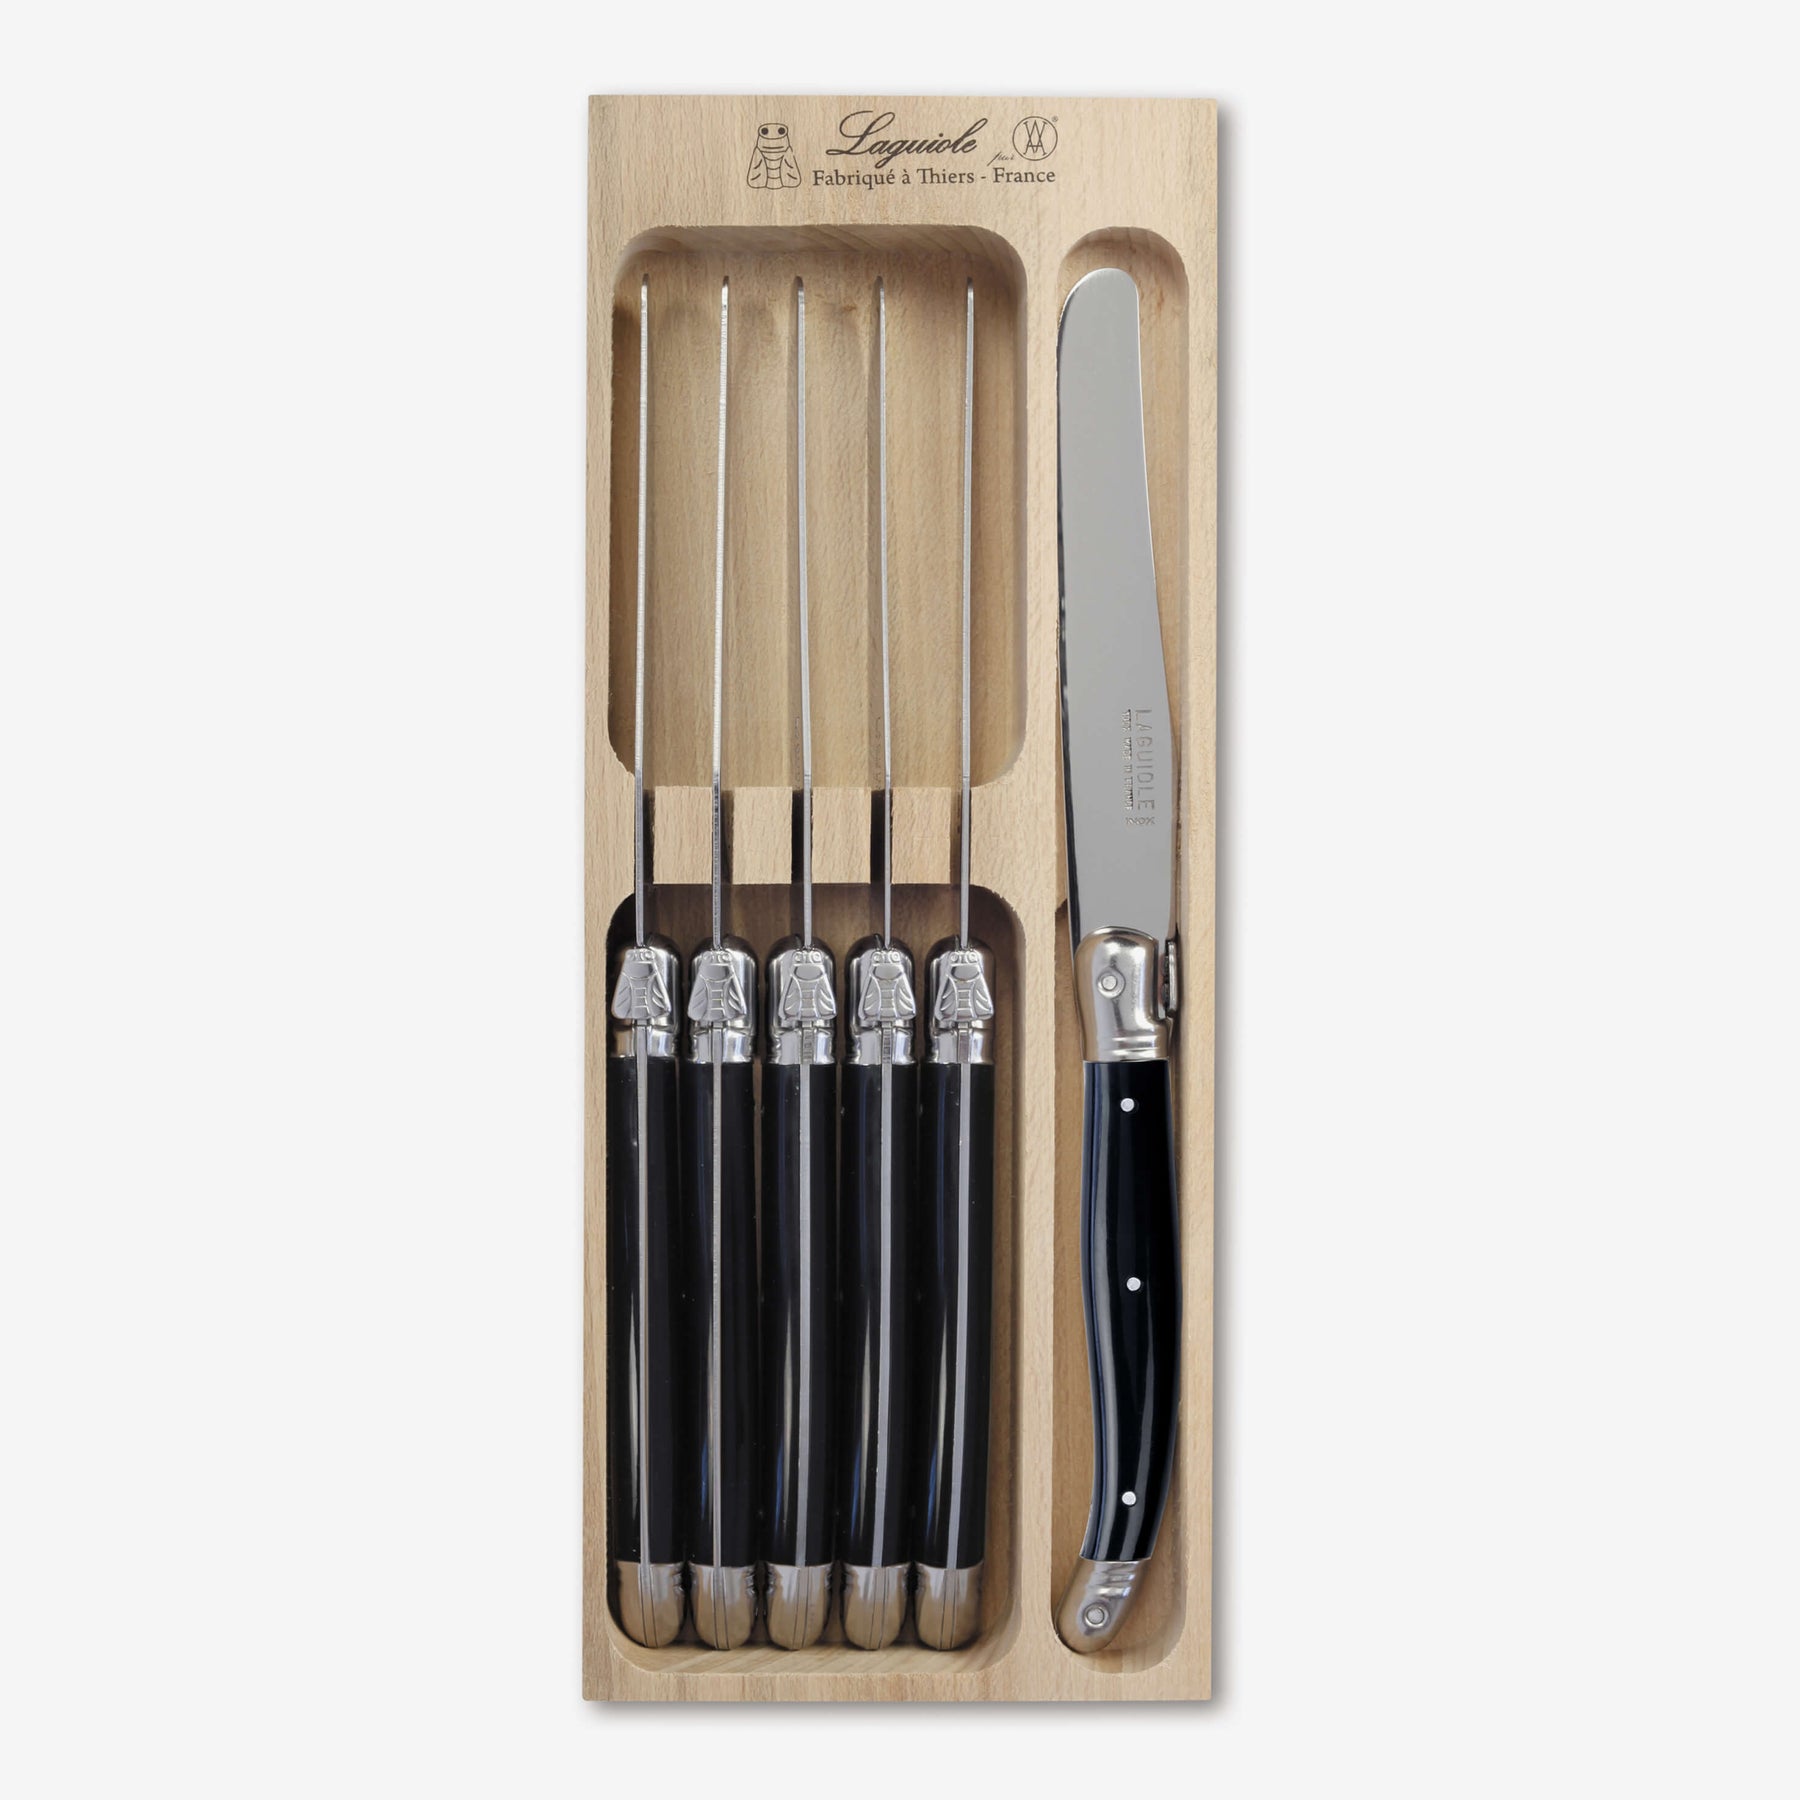 6 Piece Dinner Knife Set in Wooden Tray